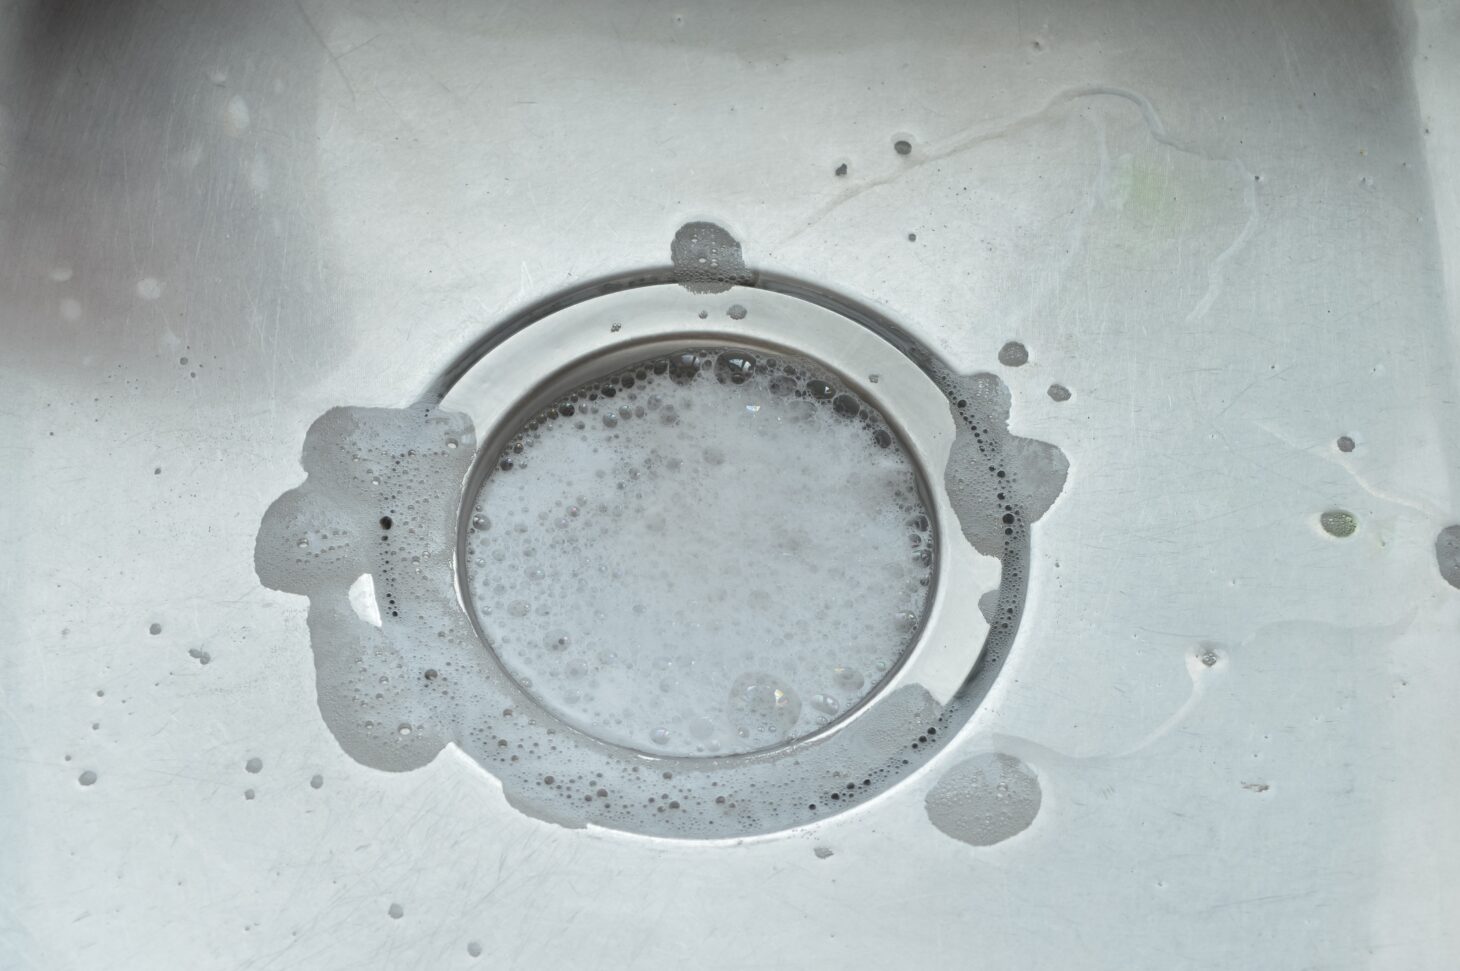 A drain foaming with cleaner